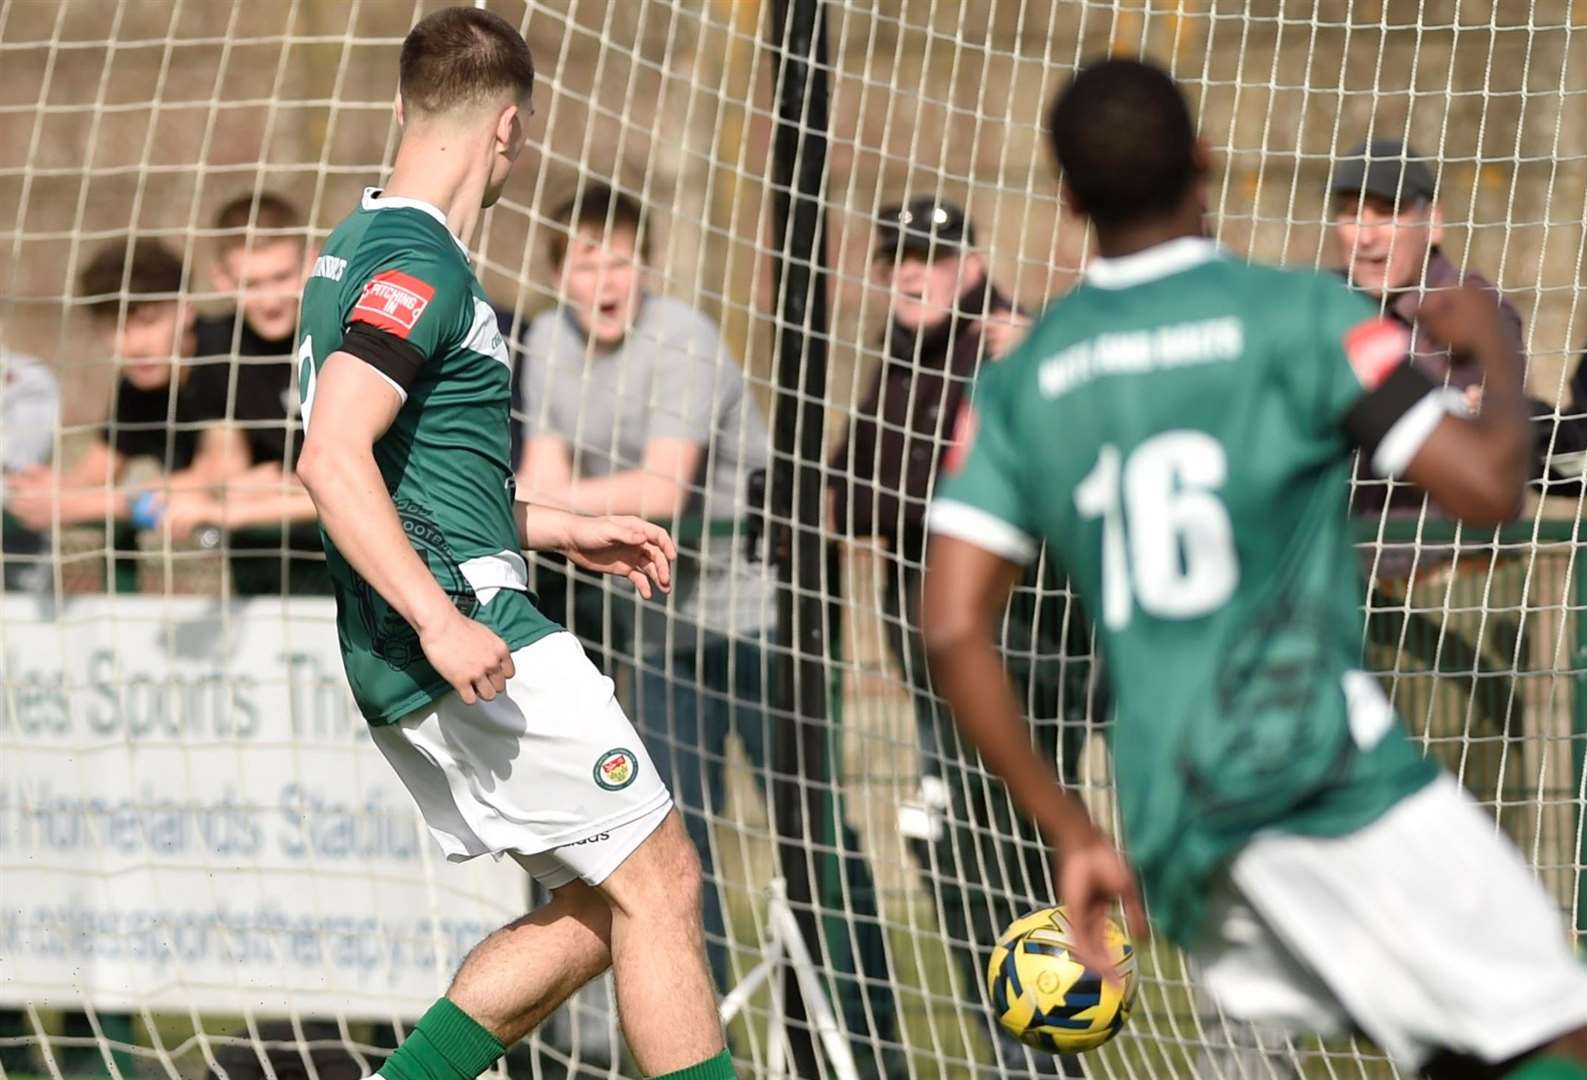 Noah Carney and Lanre Azeez see team-mate Robbie Rees find the net for a late Ashford consolation in a 3-1 loss to Chichester. Picture: Ian Scammell